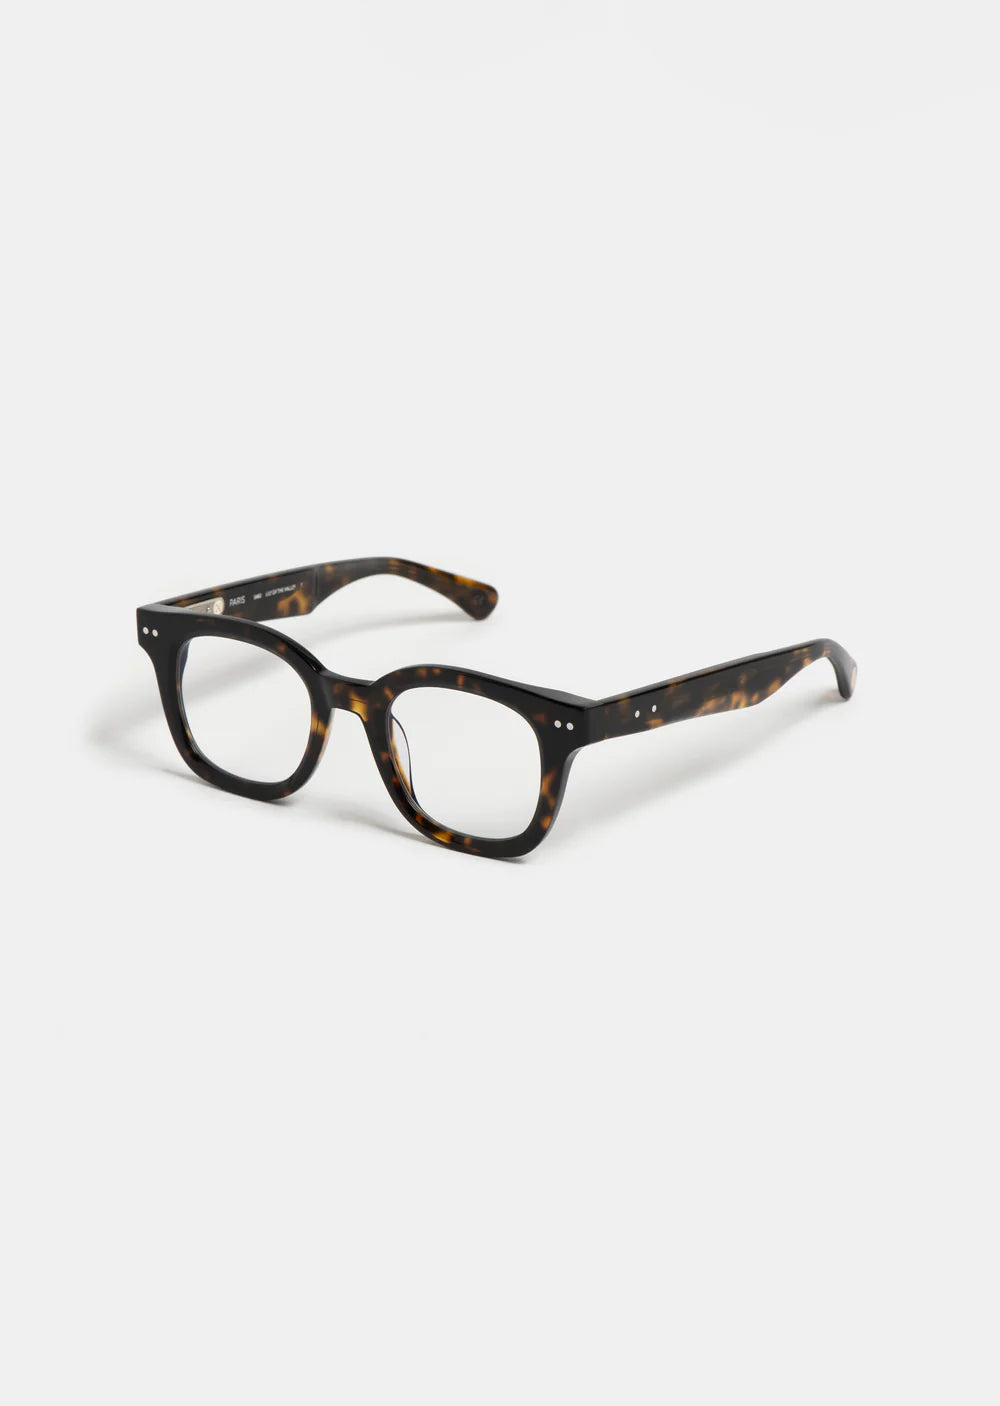 Lunette de vue Peter And May S80 LILY OF THE VALLEY TORTOISE